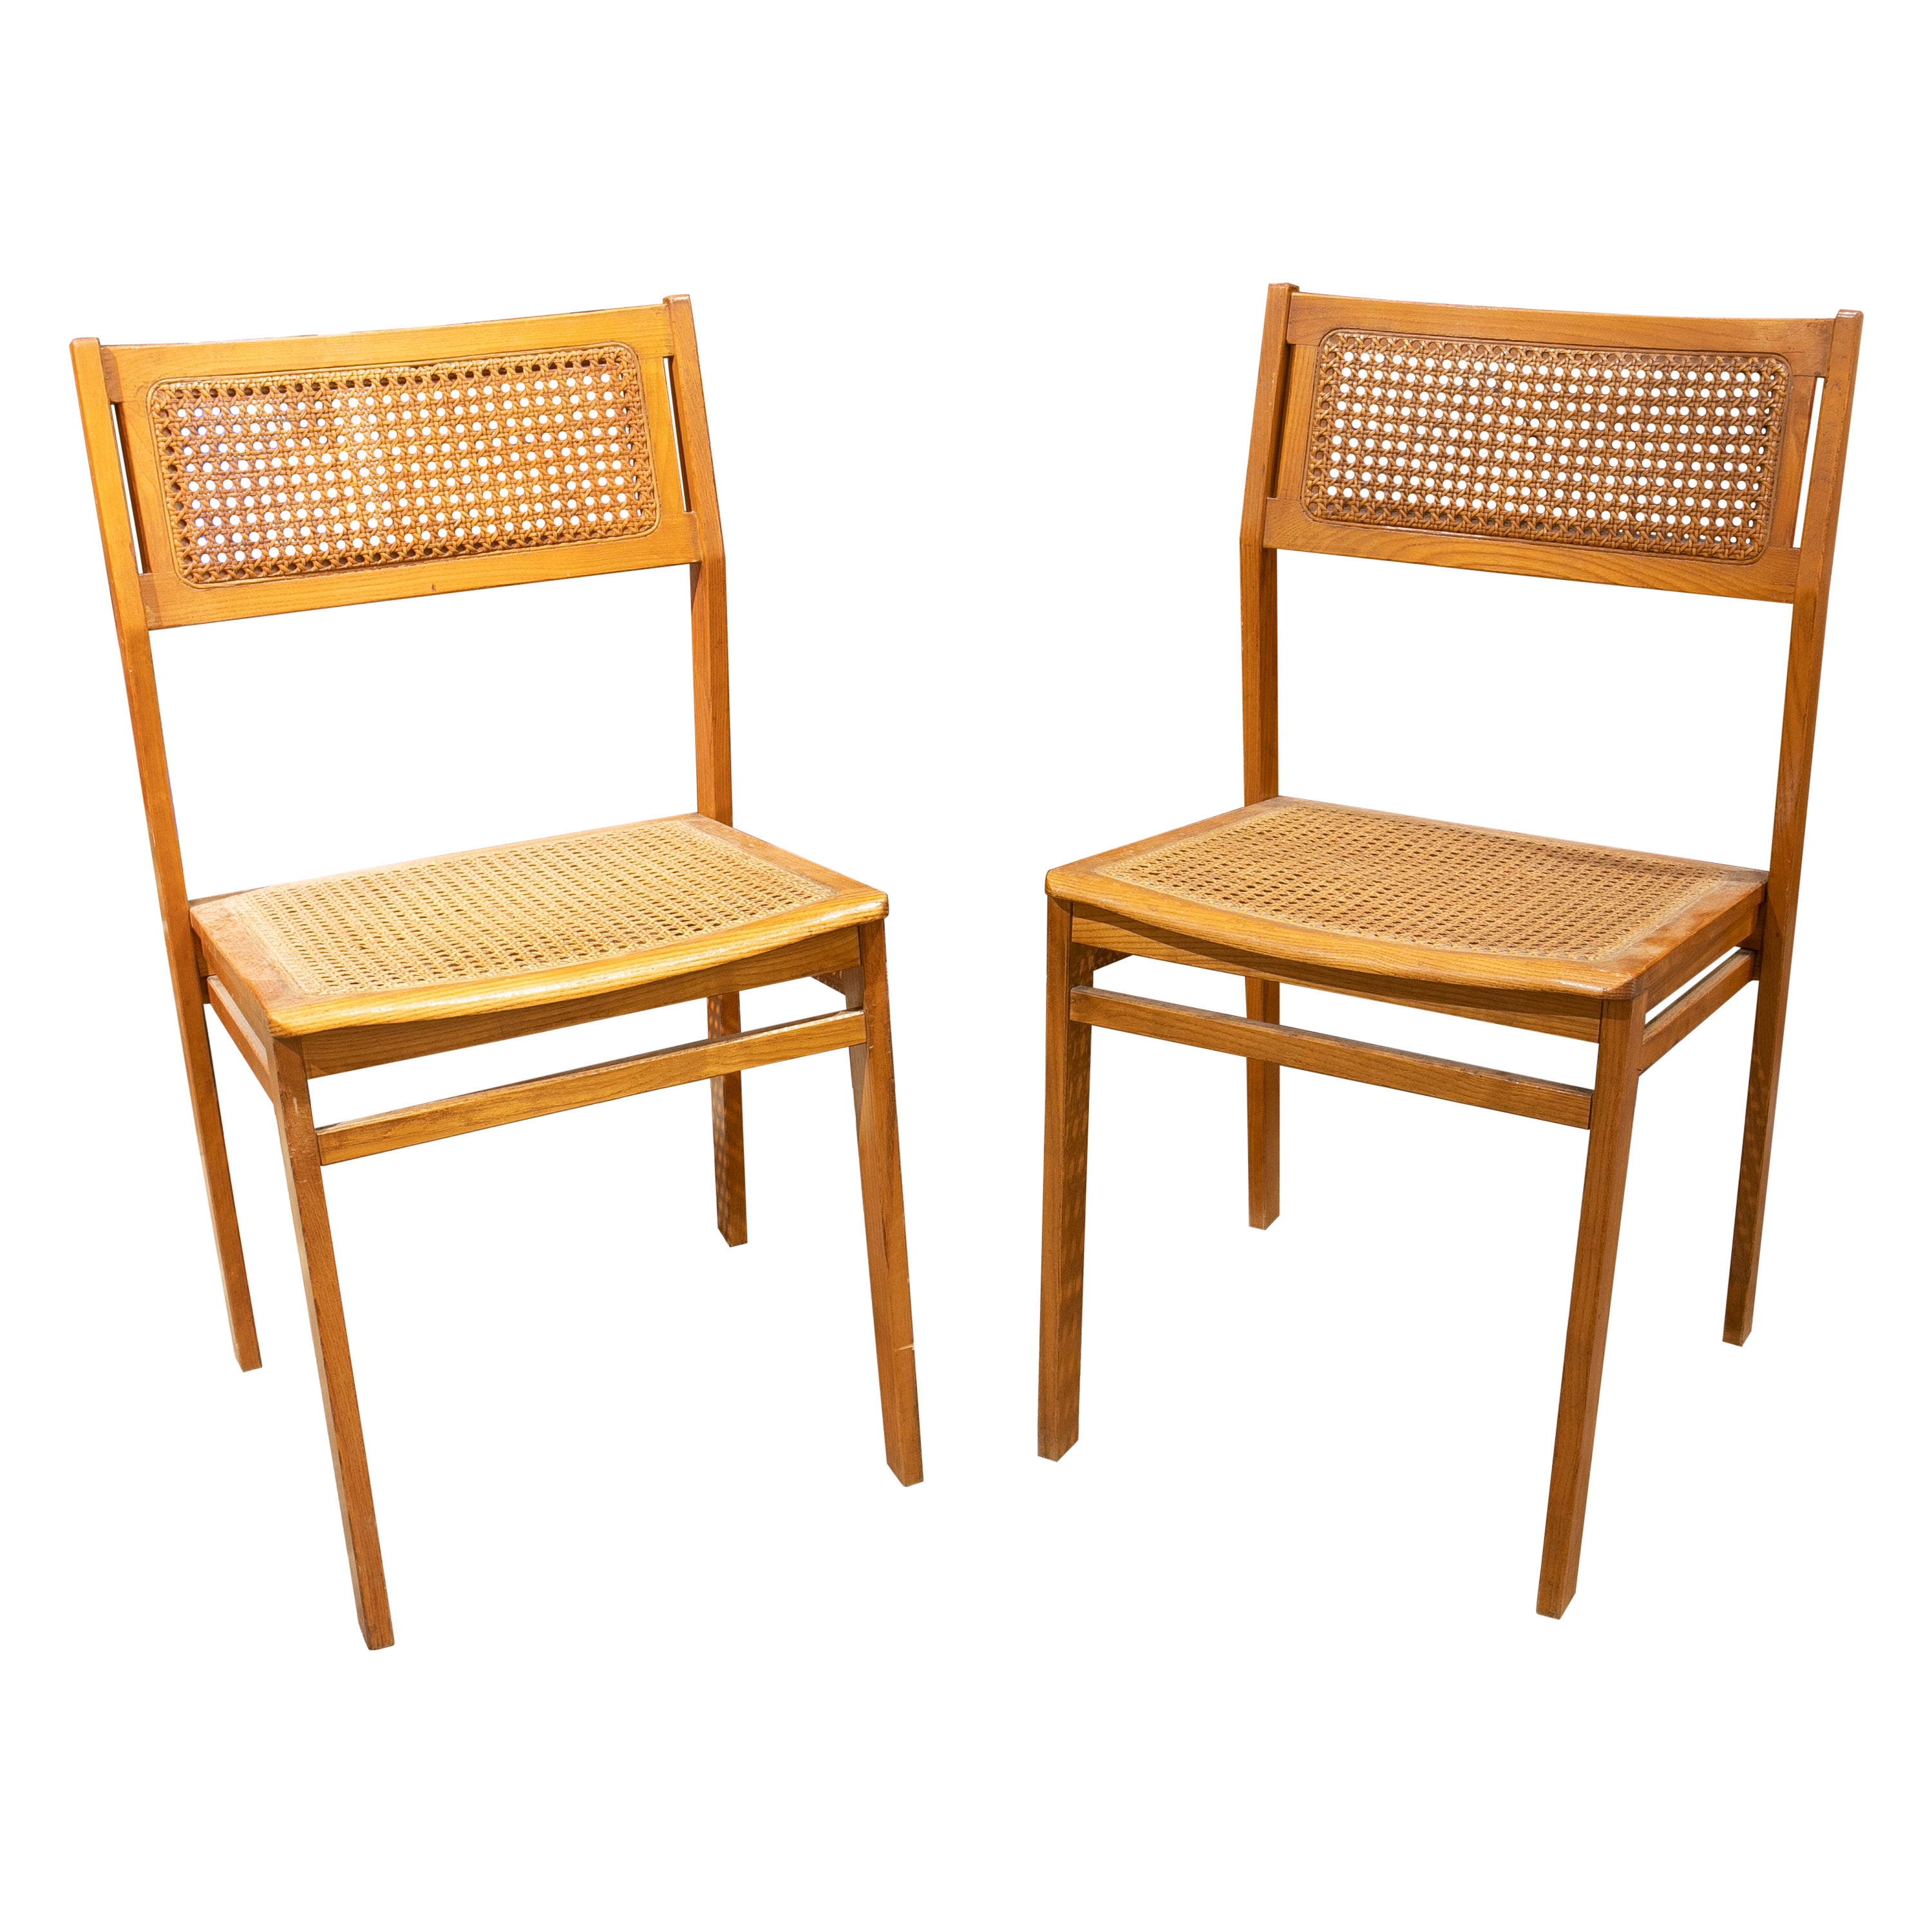 1970s Swedish Pair of Wooden Chairs with Wicker Seat and Back For Sale